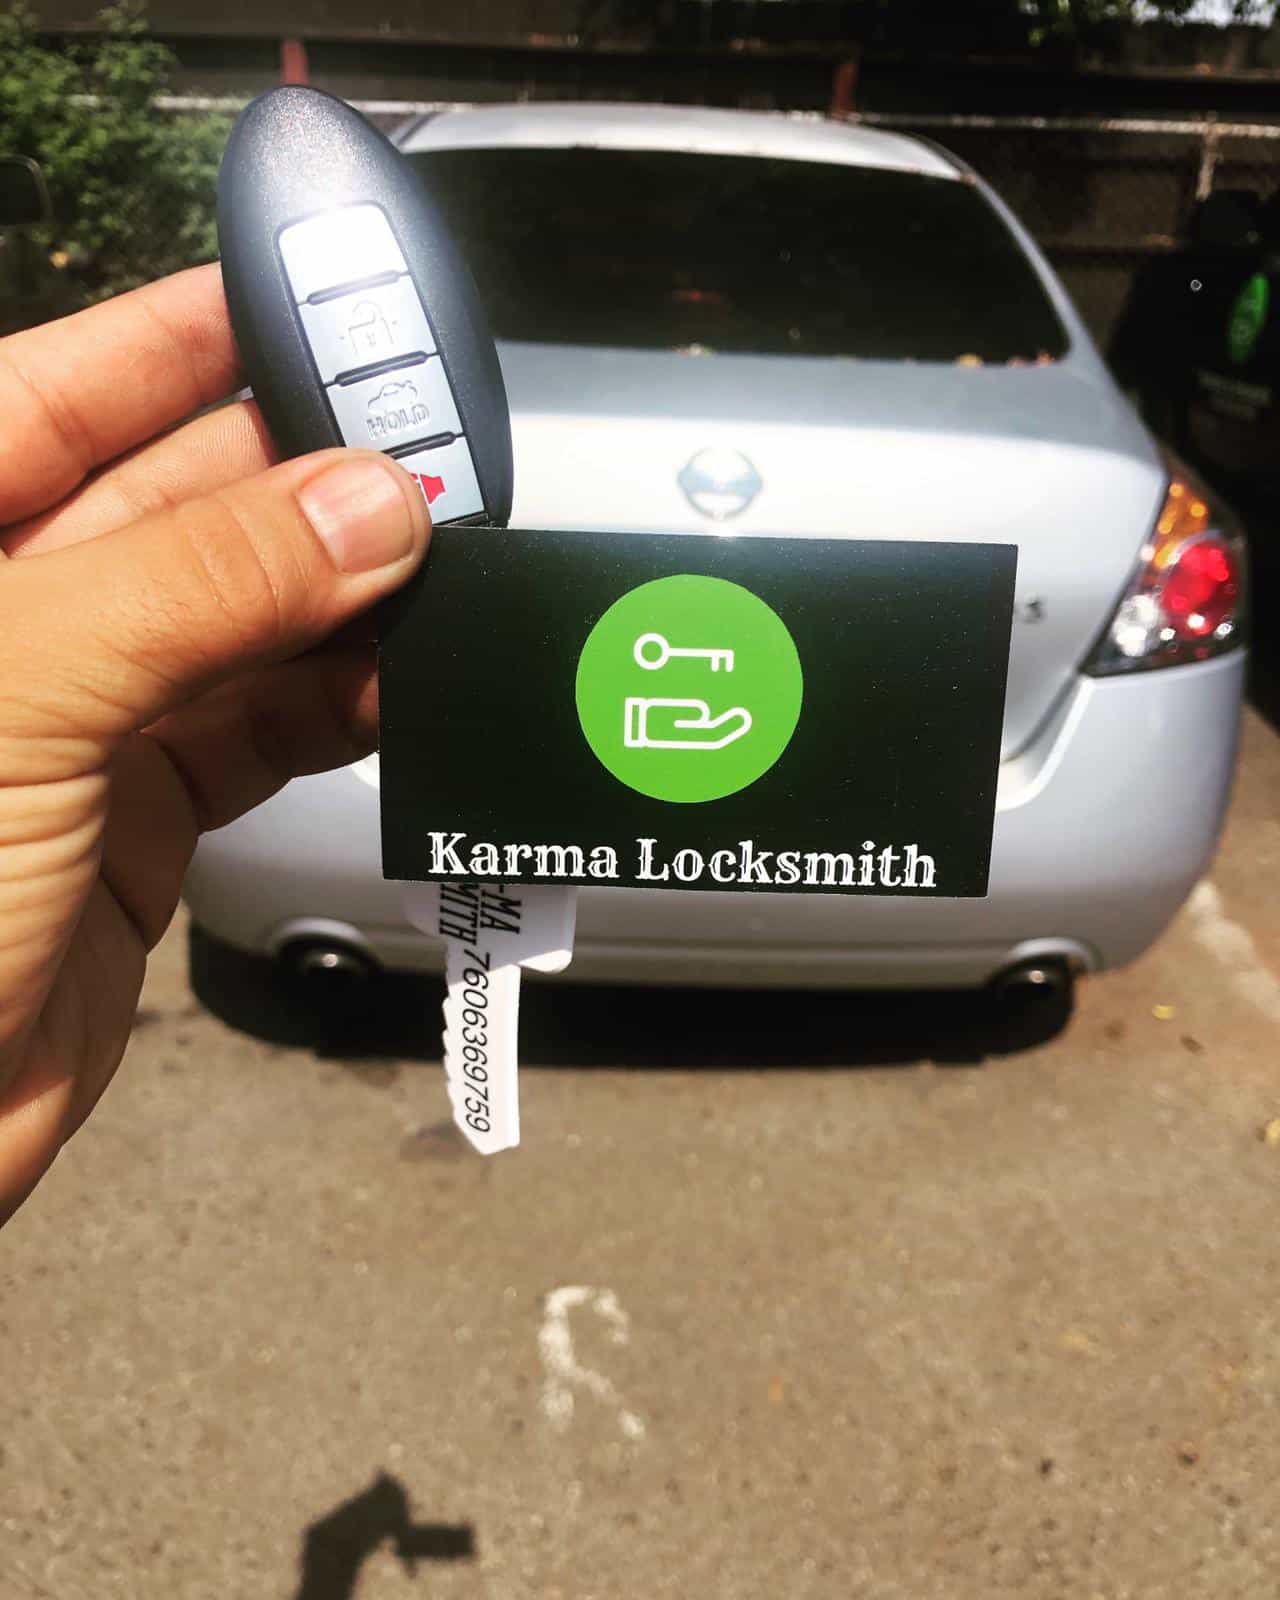 Locksmith Poway saves another Driver from car lockout